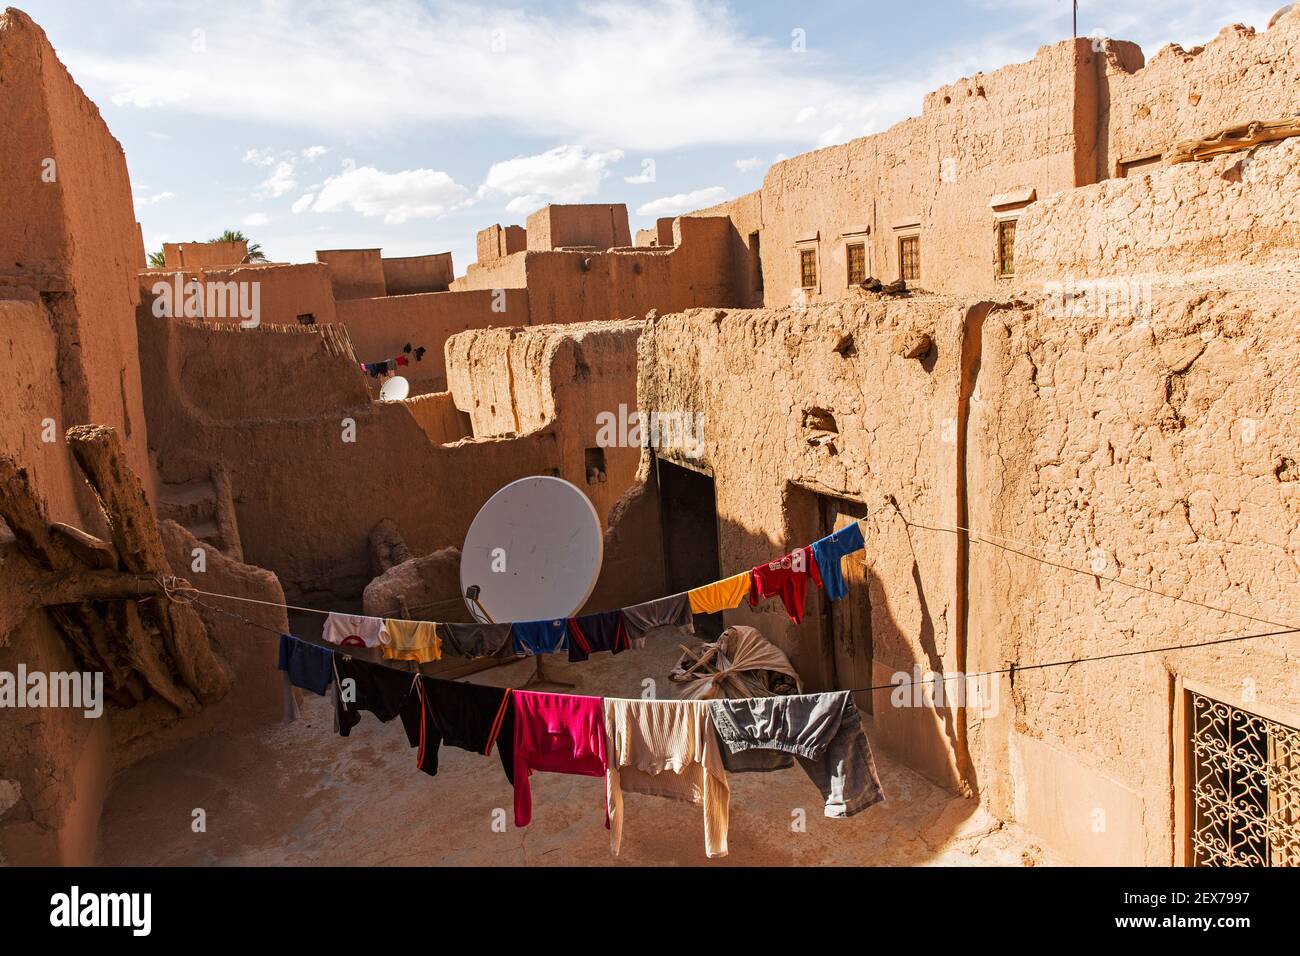 Morocco, Tinejdad, Todra Valley, Ksar El Khorbat, is a village of  fortified walls made of soil, with satellite dish and hanging laundry Stock Photo